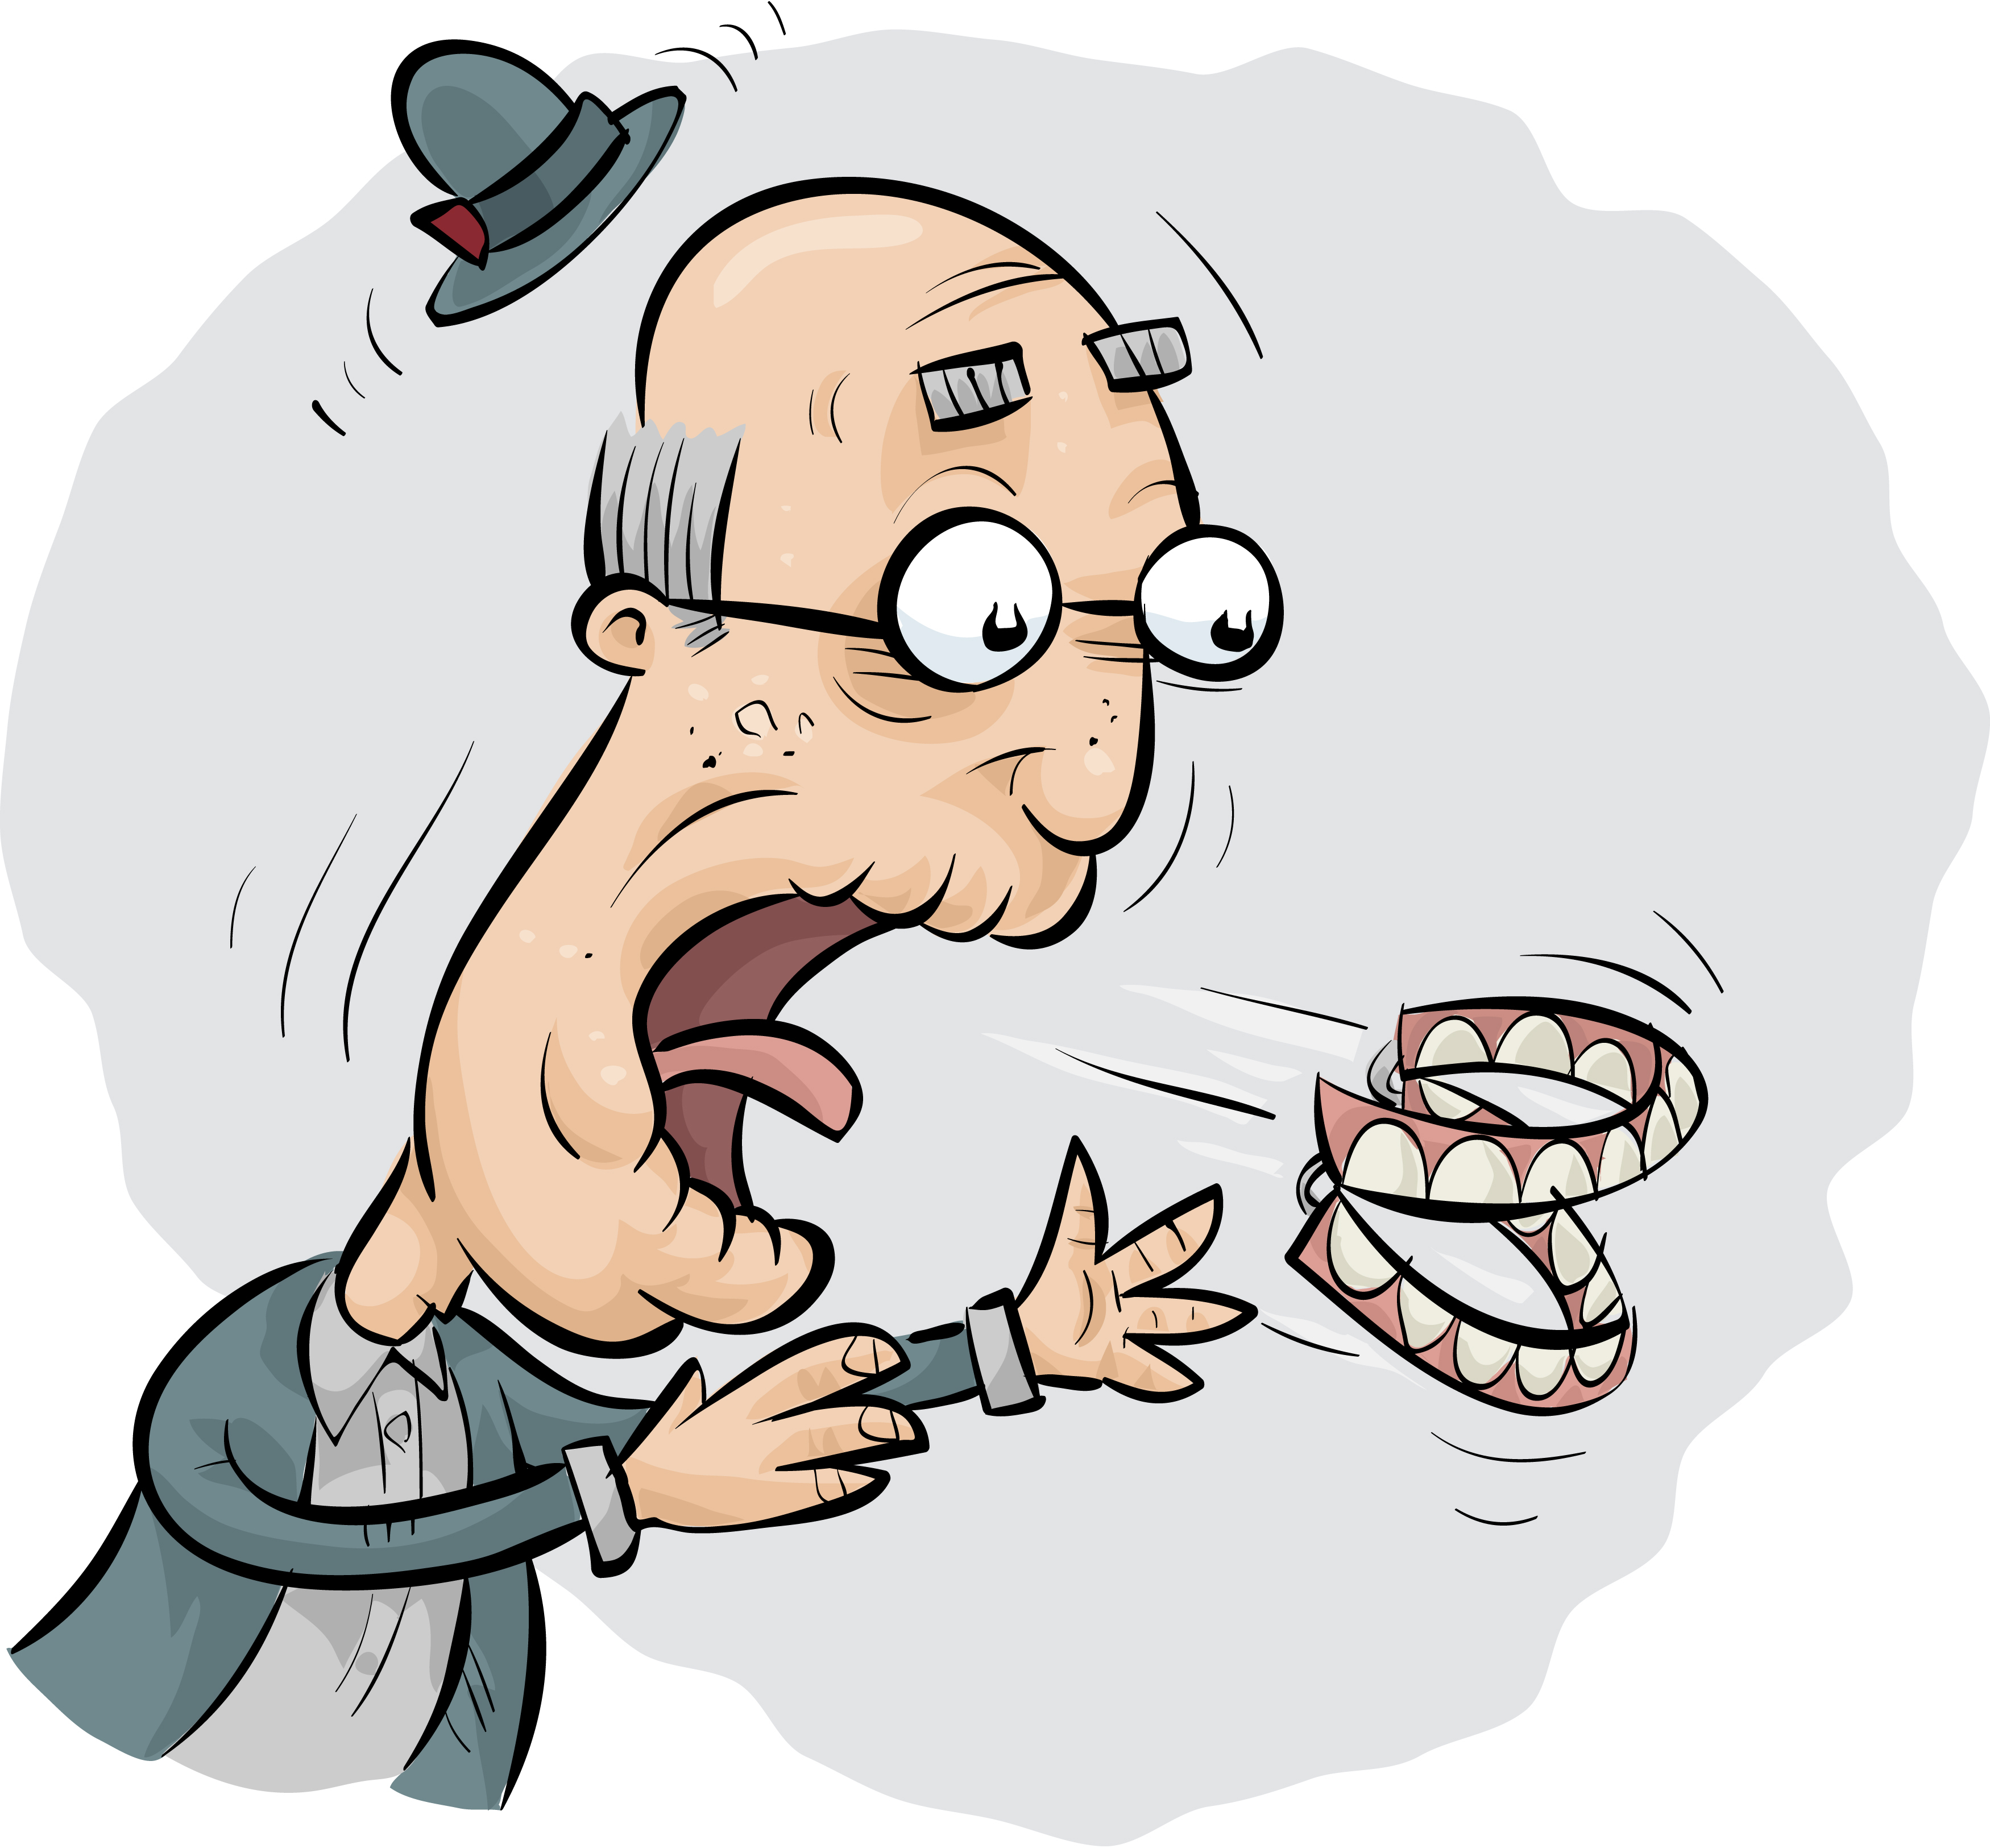 Cartoon of elderly man having dentures fly out of his mouth